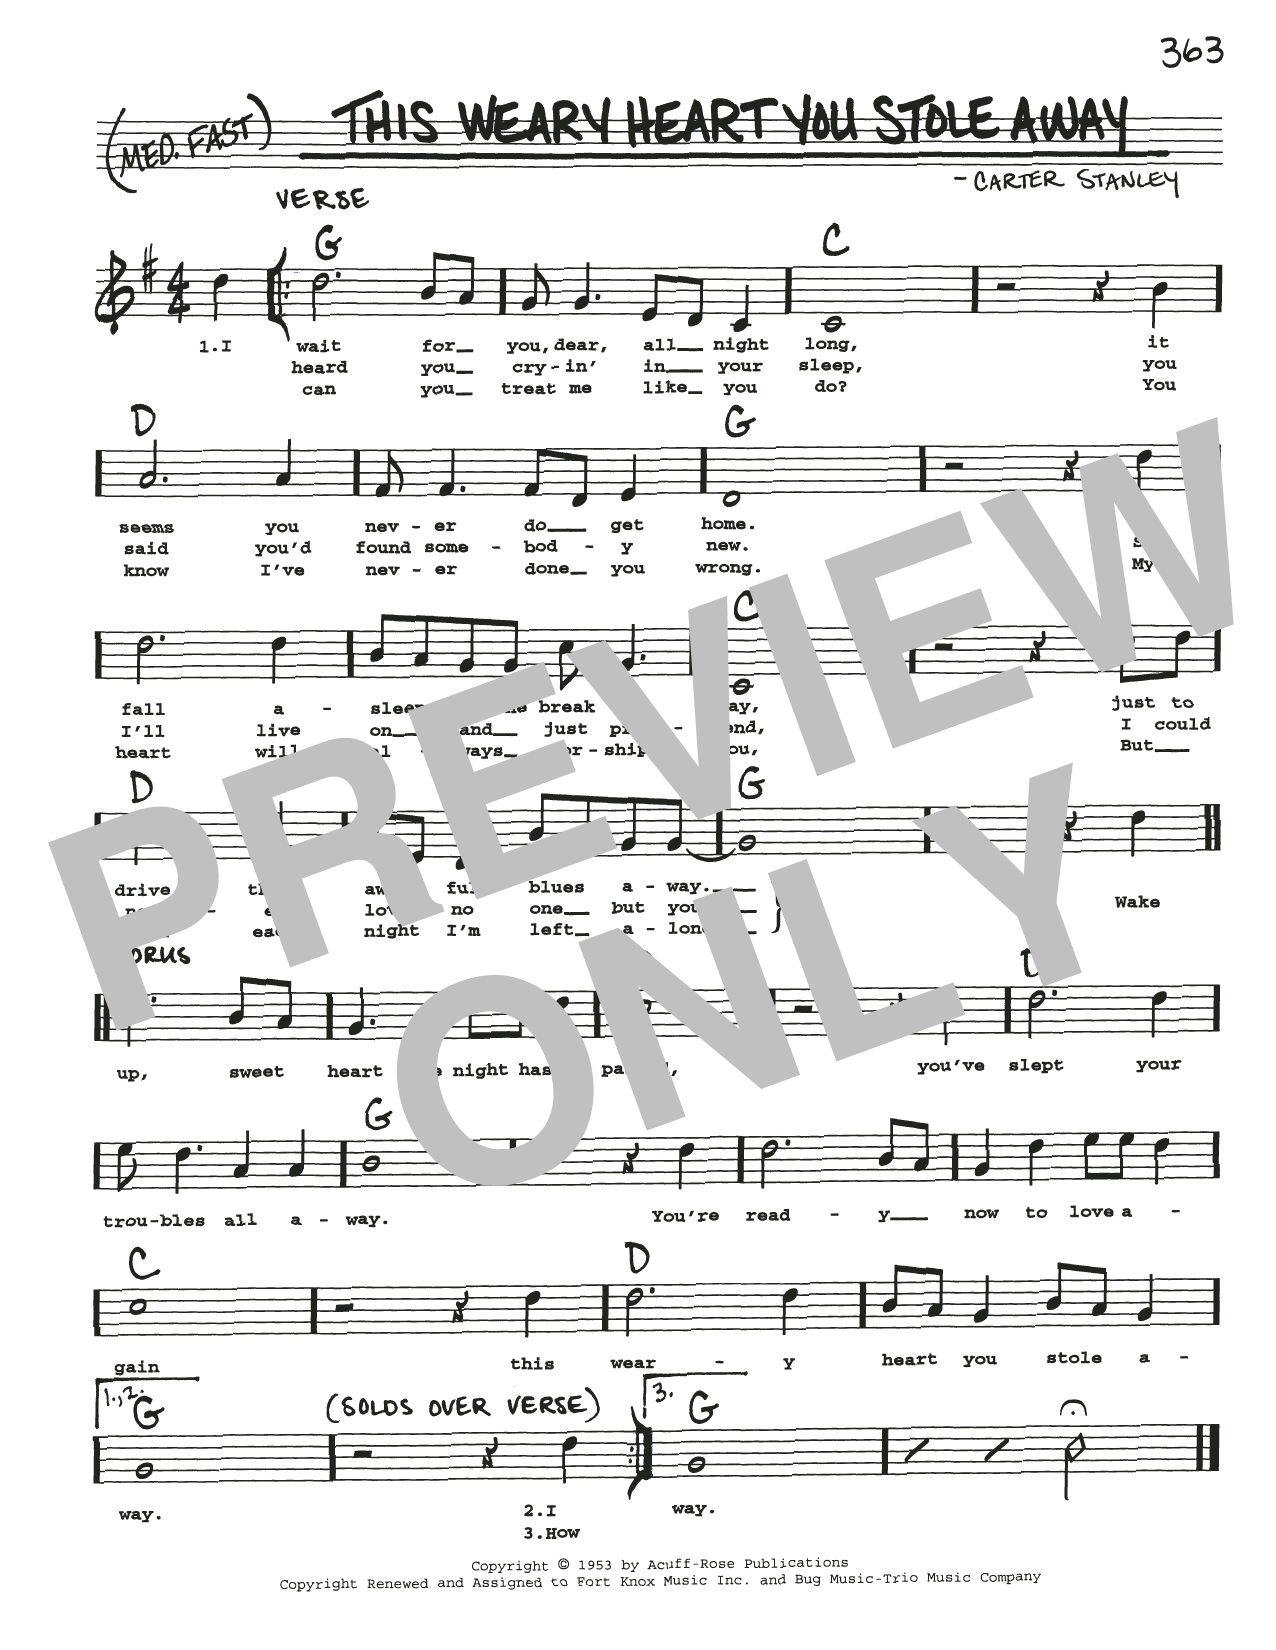 Download Carter Stanley This Weary Heart You Stole Away Sheet Music